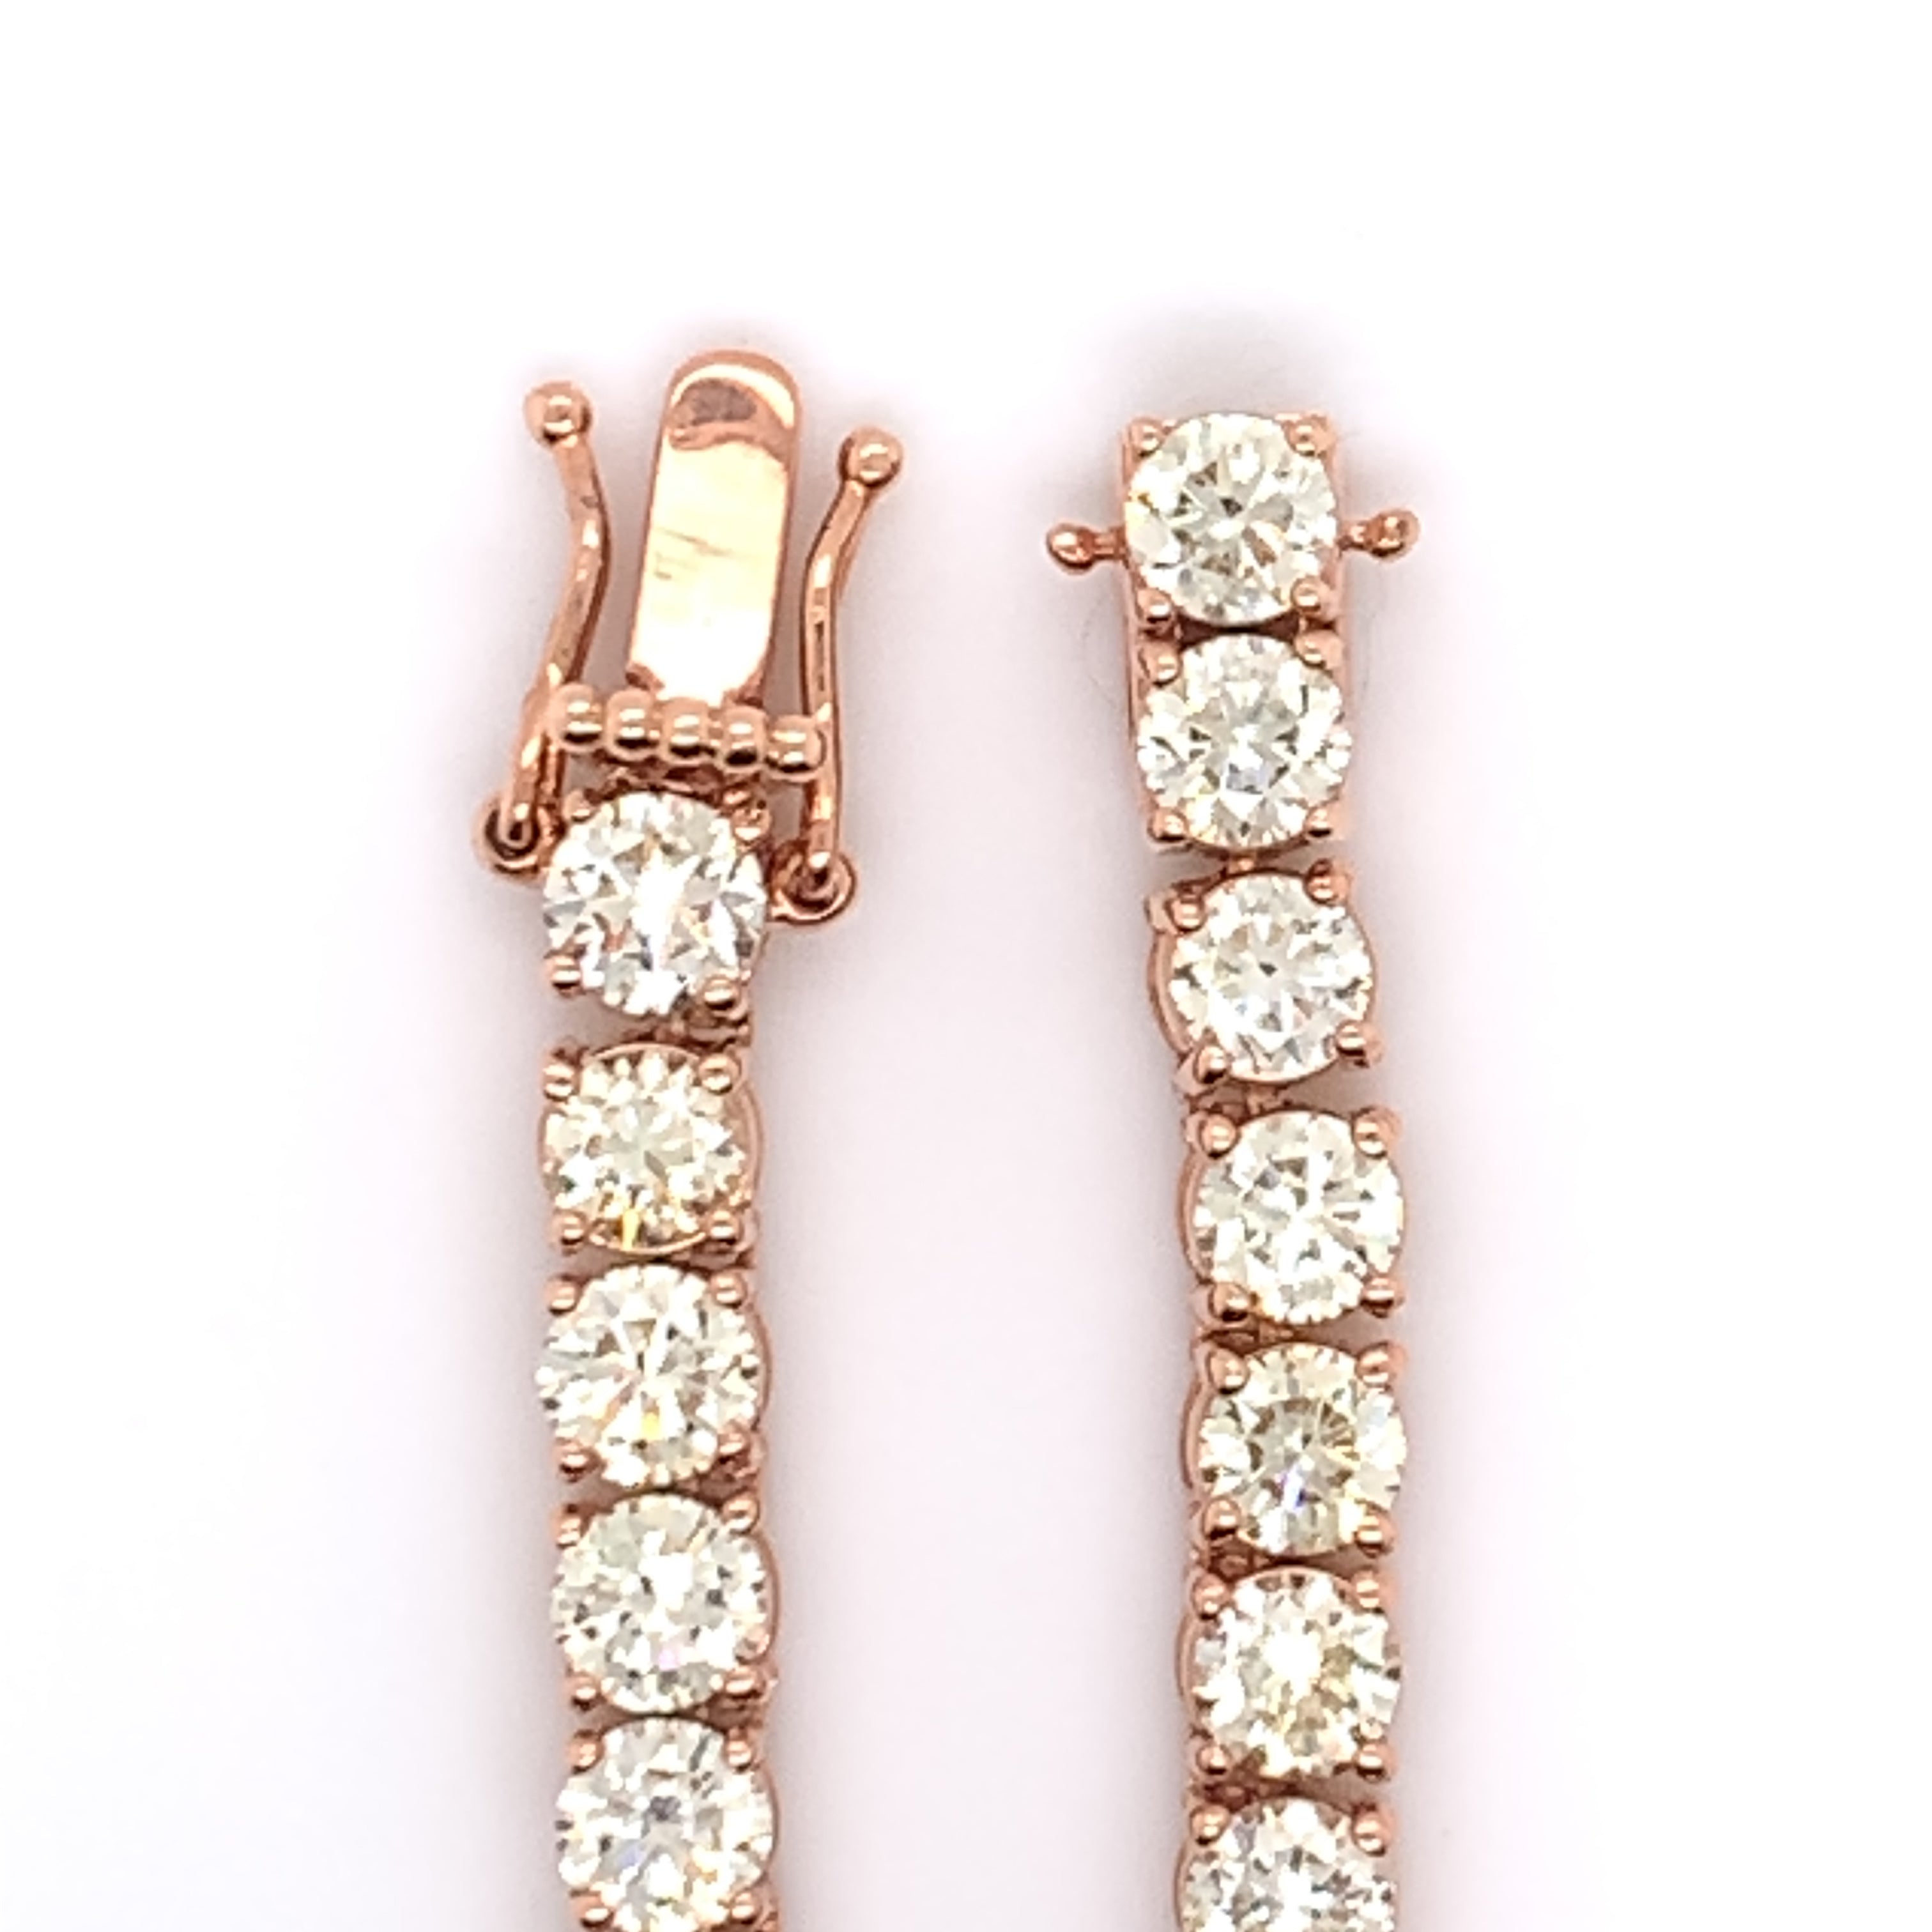 18.00 CT. - 35.00 CT. 21 Pointer Diamond Four Prong Tennis Chain in Gold - White Carat - USA & Canada